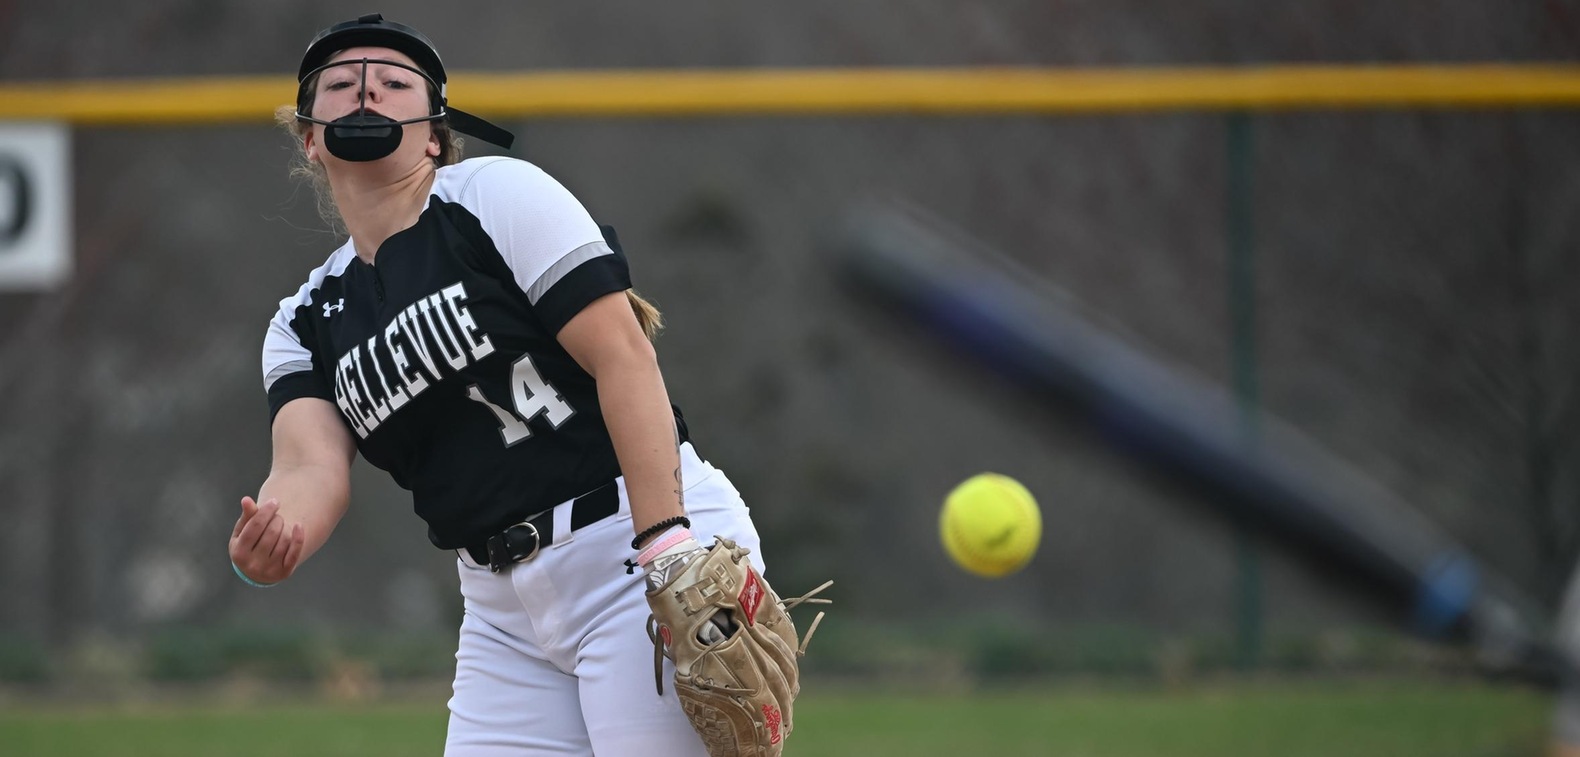 Katie Cunningham tossed a three-hit complete-game shutout in the opener.